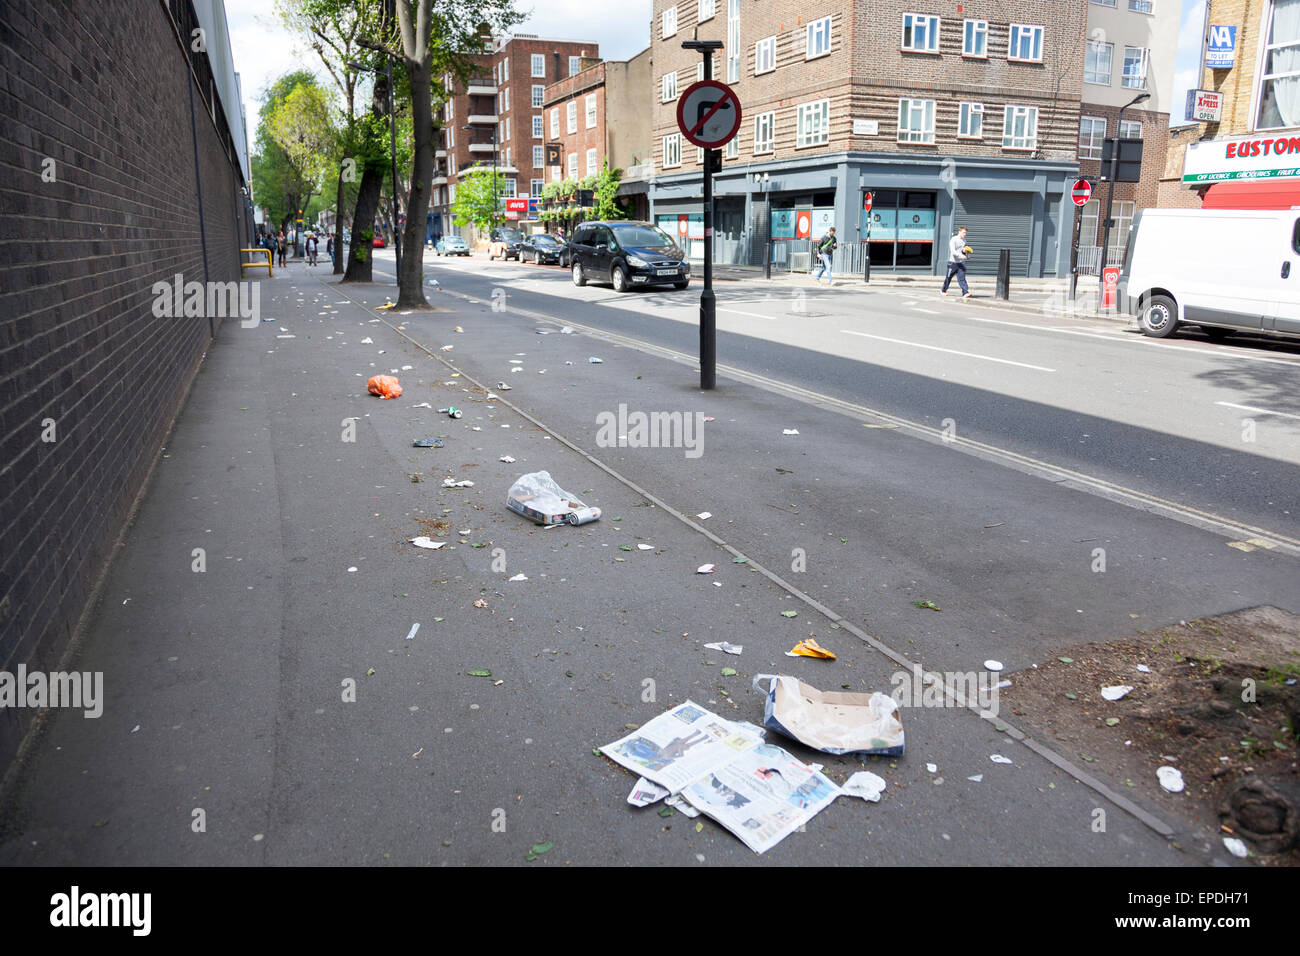 Scattered litter on the pavement - London, England Stock Photo